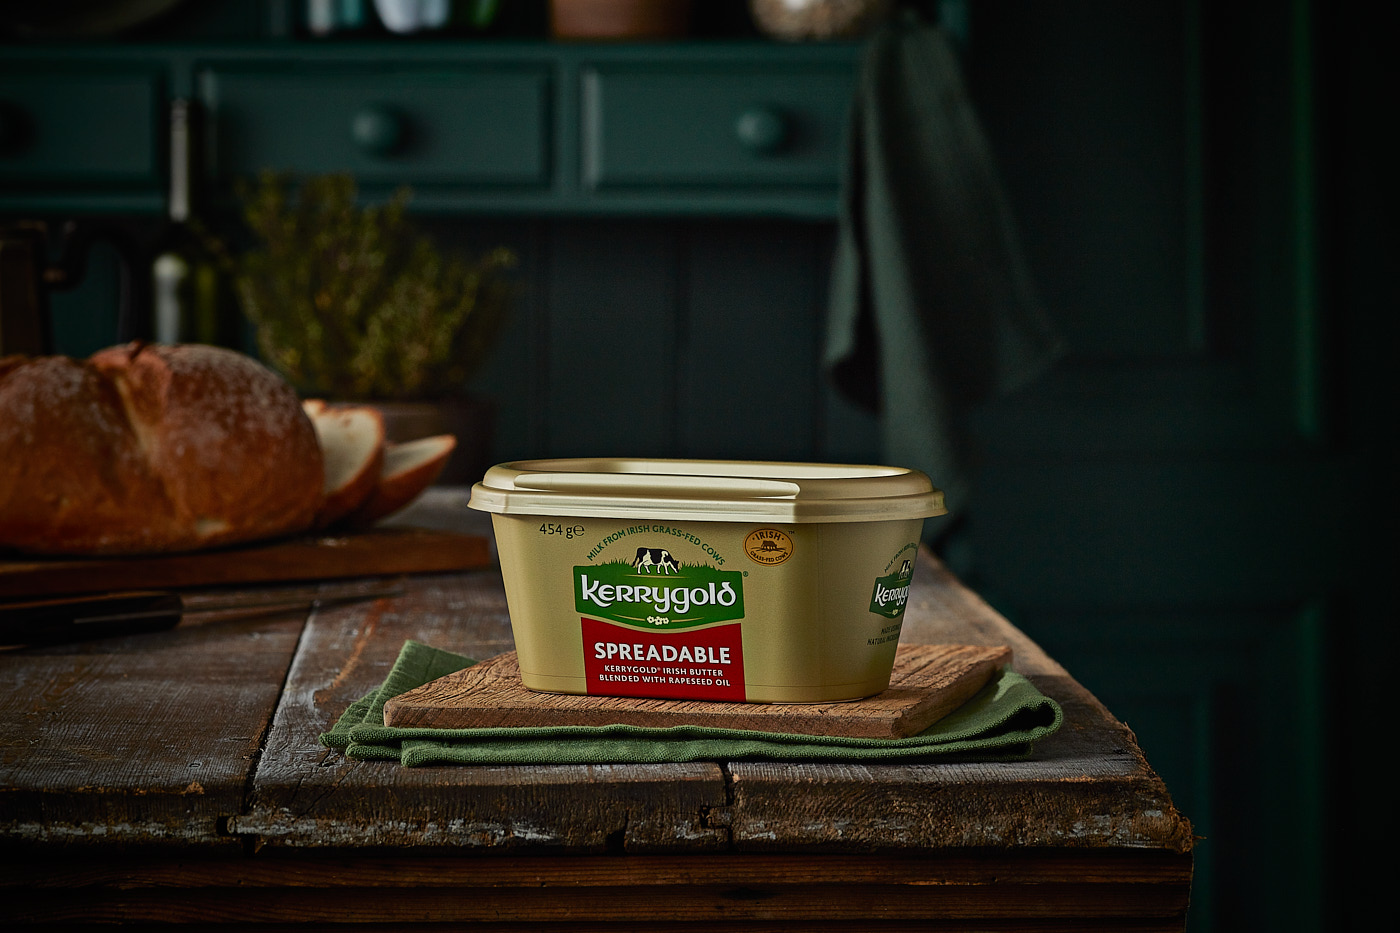 Food Photographer Ireland - Kerrygold Spreadable butter on Kitchen Table